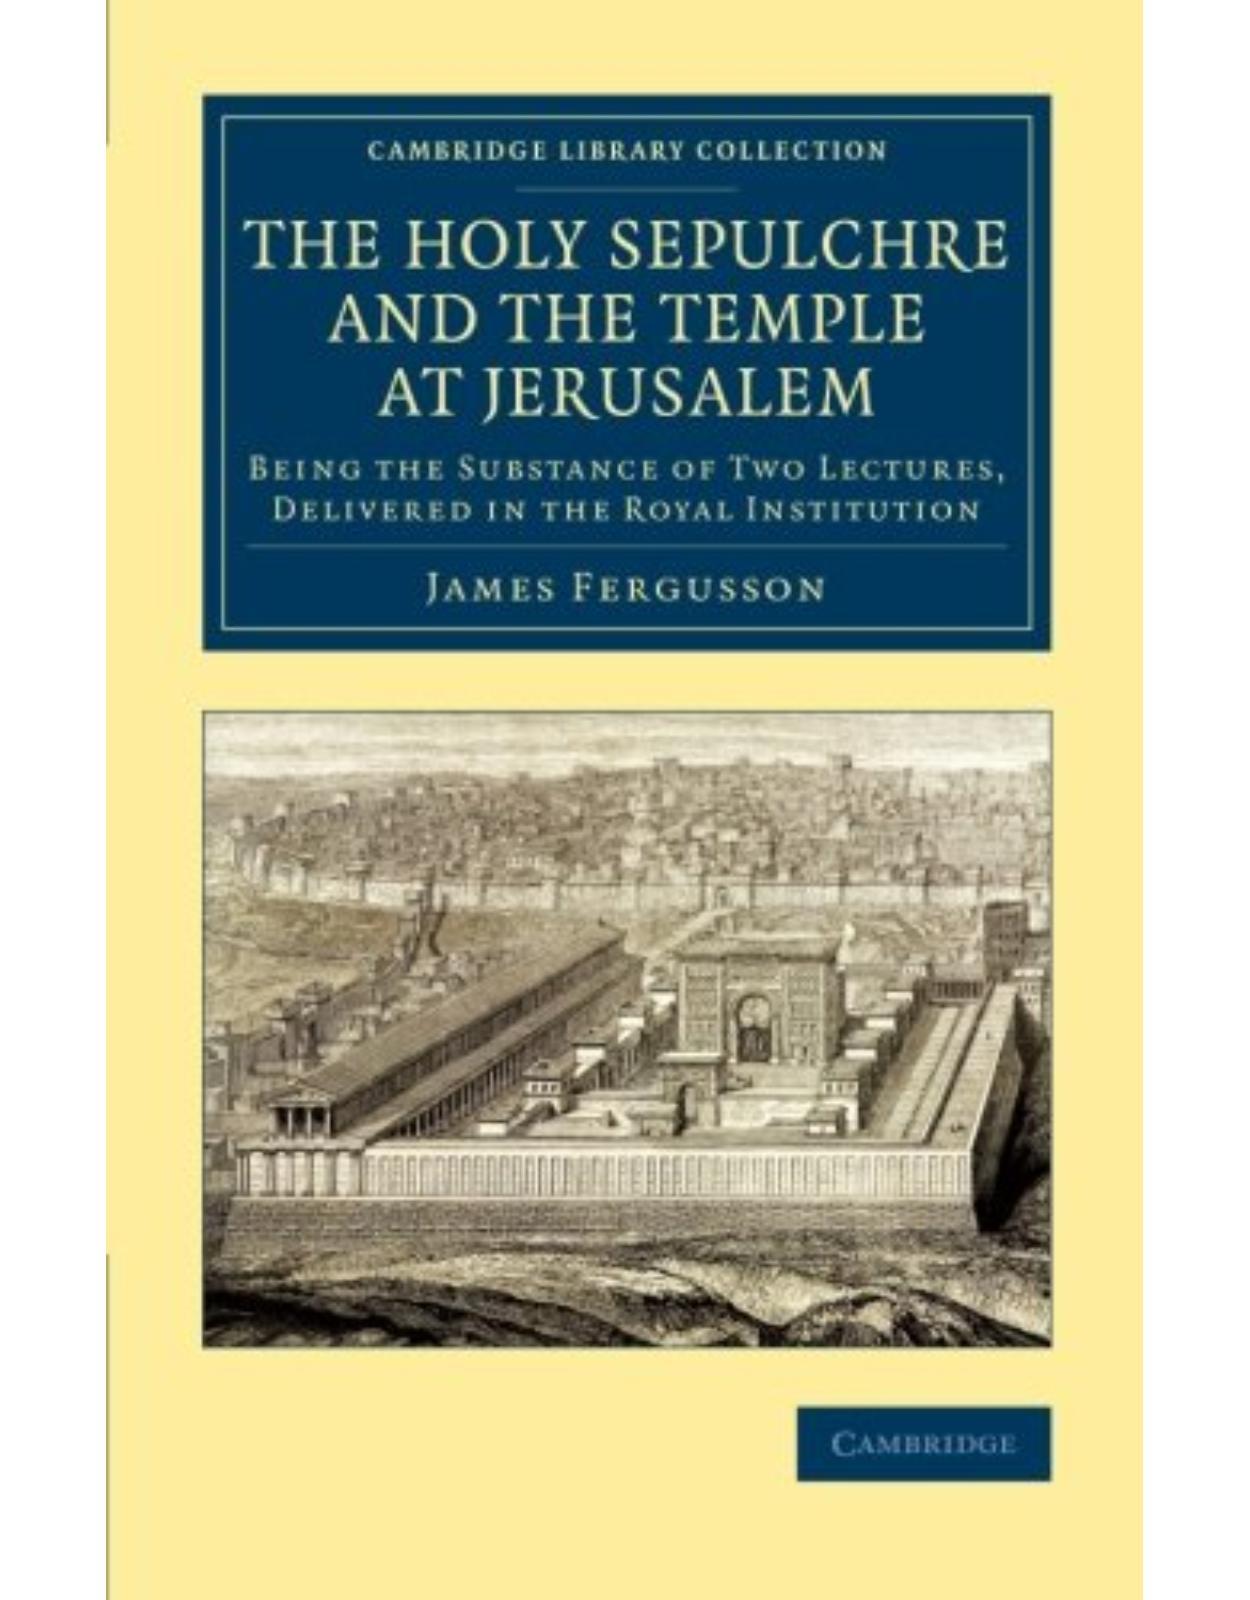 The Holy Sepulchre and the Temple at Jerusalem: Being the Substance of Two Lectures, Delivered in the Royal Institution (Cambridge Library Collection - Archaeology) 